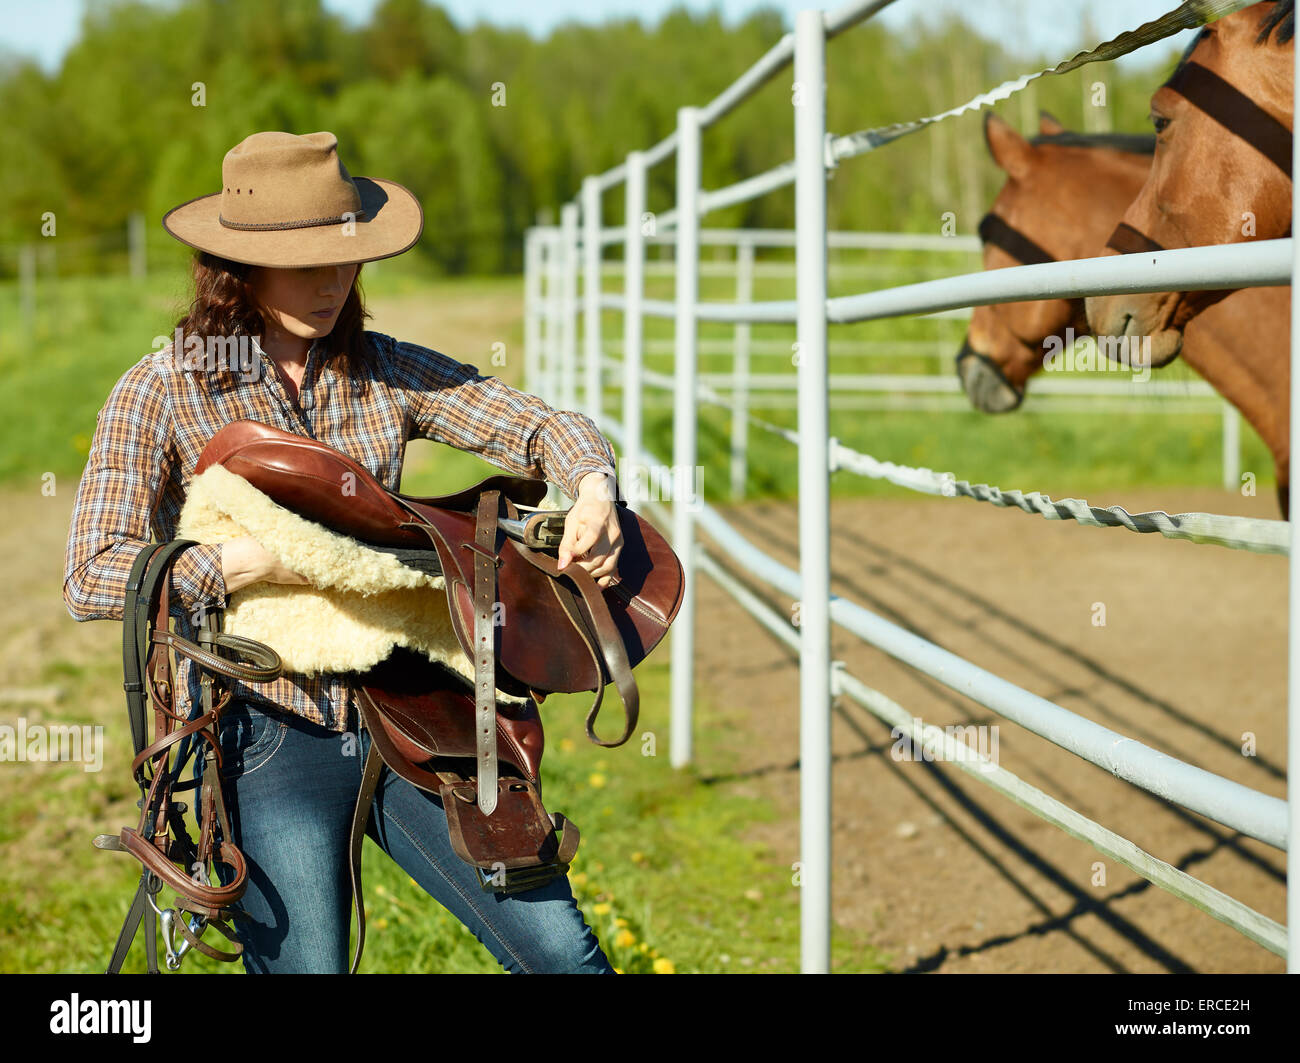 Cowgirl carrying a saddle, horse in a paddock Stock Photo